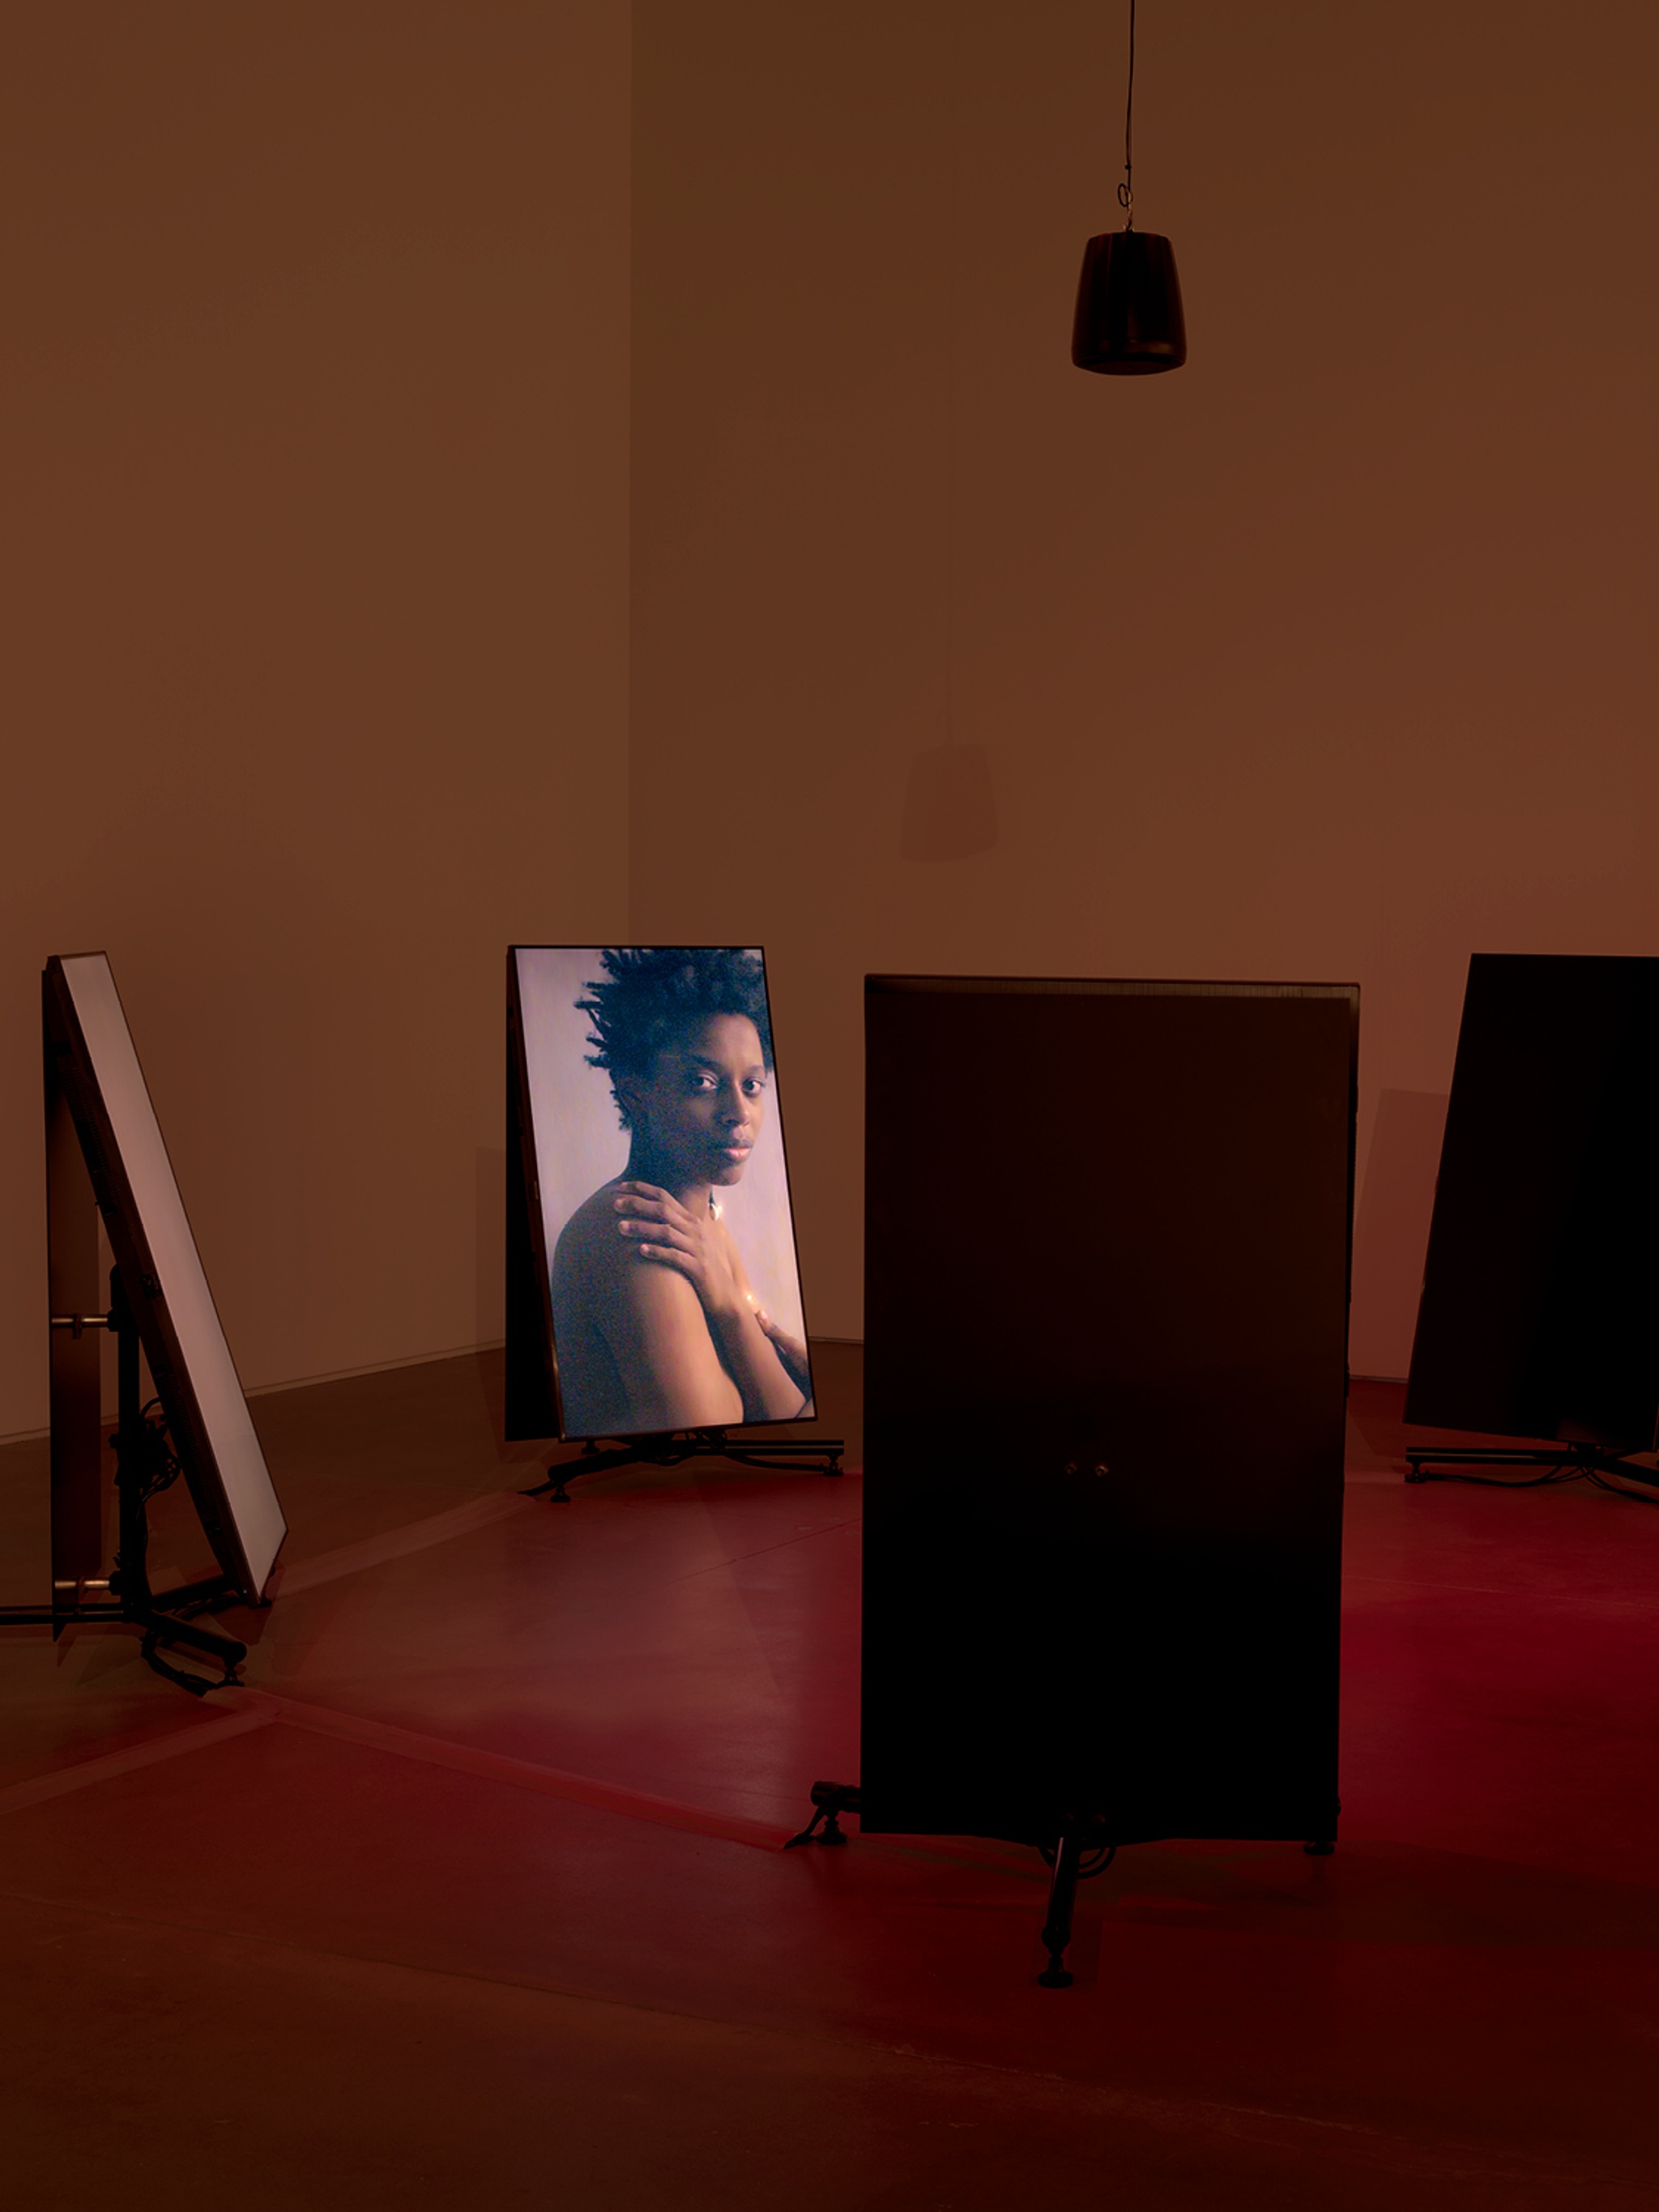 Four vertical video screens stand in a circle in a space cast in an ambient red light. On one screen facing the camera, the artist Le'Andra LeSeur is depicted with bare shoulders turning her head to look out at the audience. 